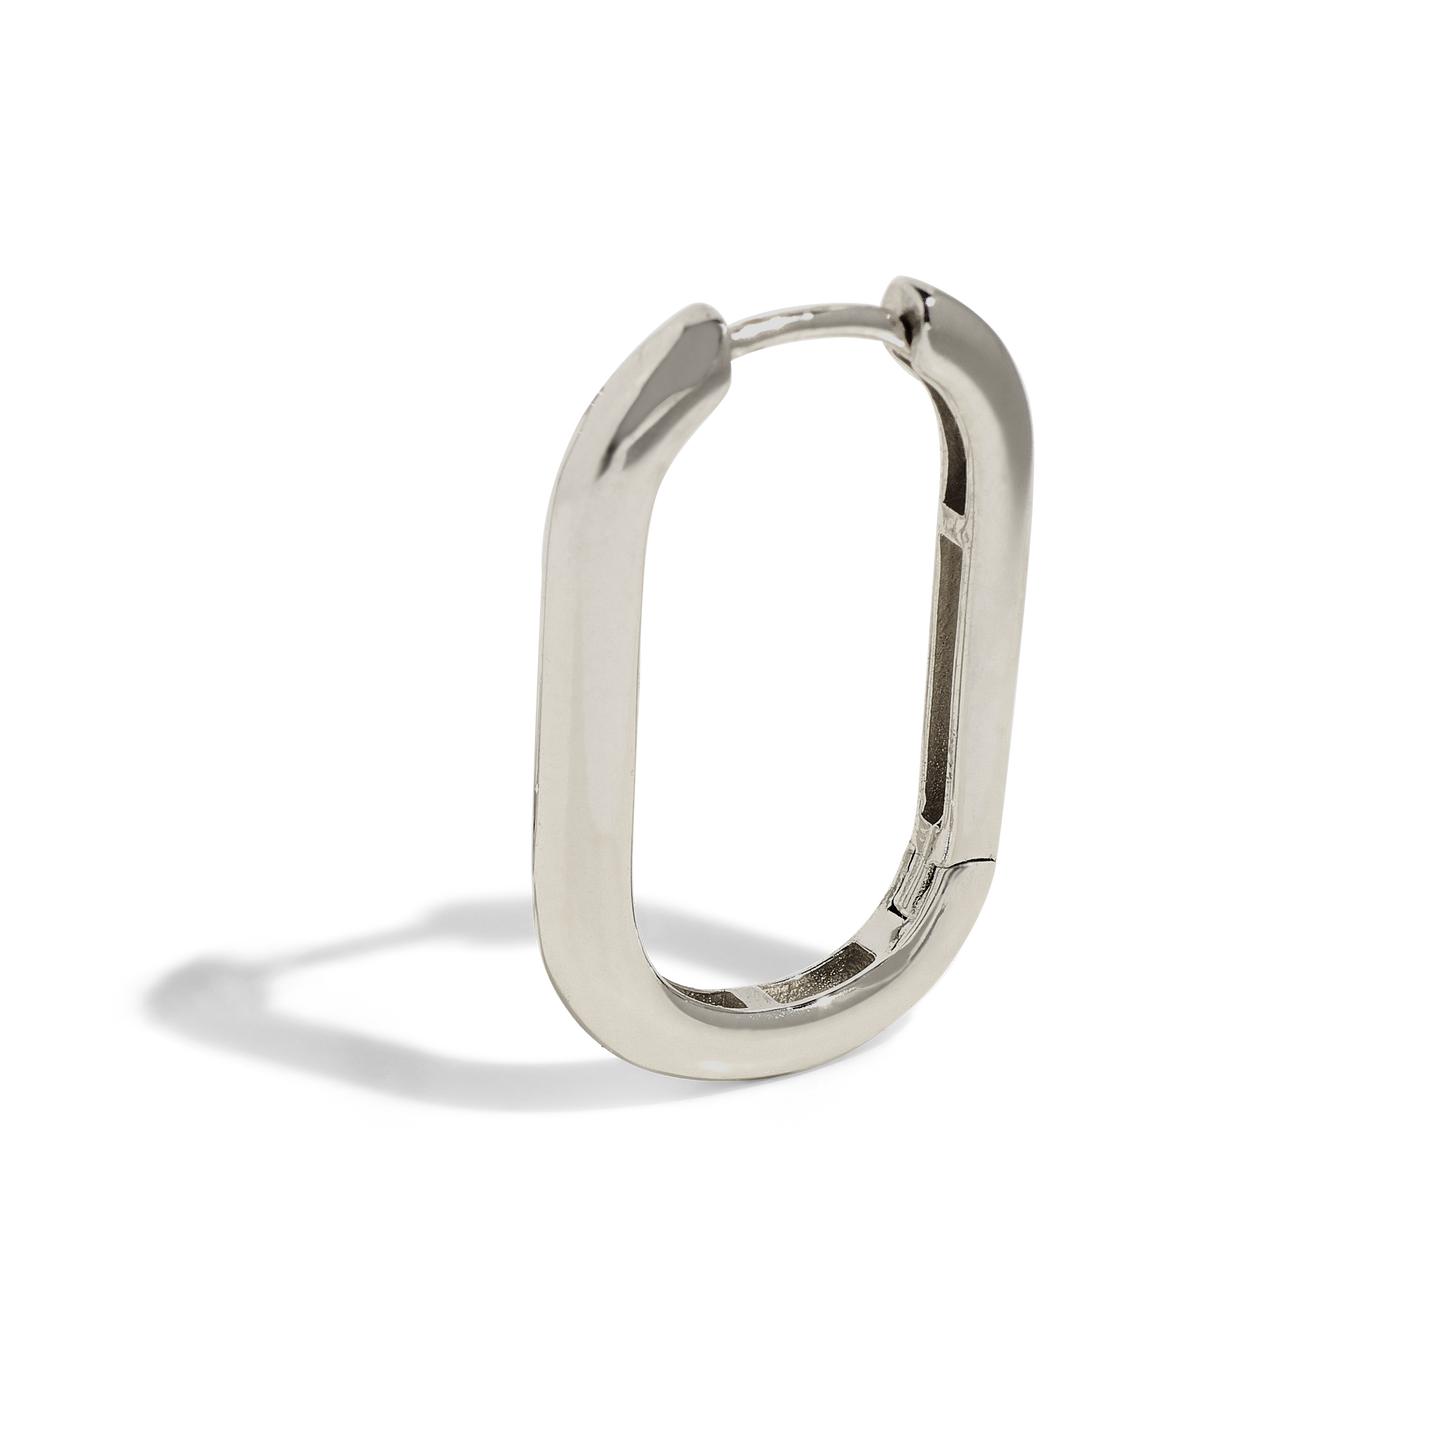 THE HARLEY HOOP - Solid white gold